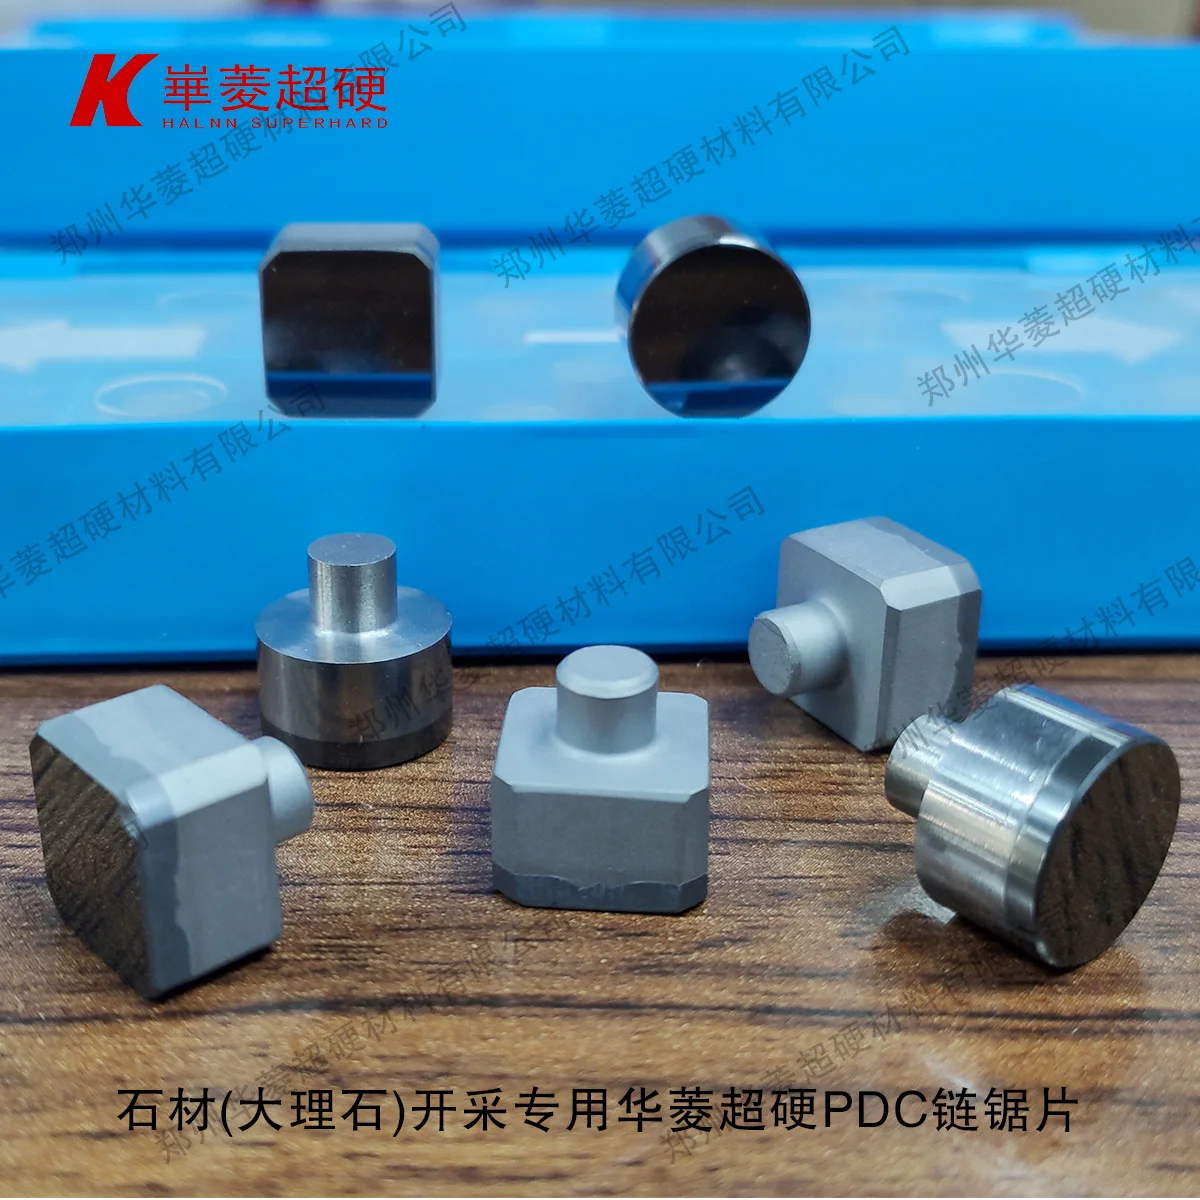 PDC cutter PDC cutters  Chainsaw machines cutting equipment MARBLE